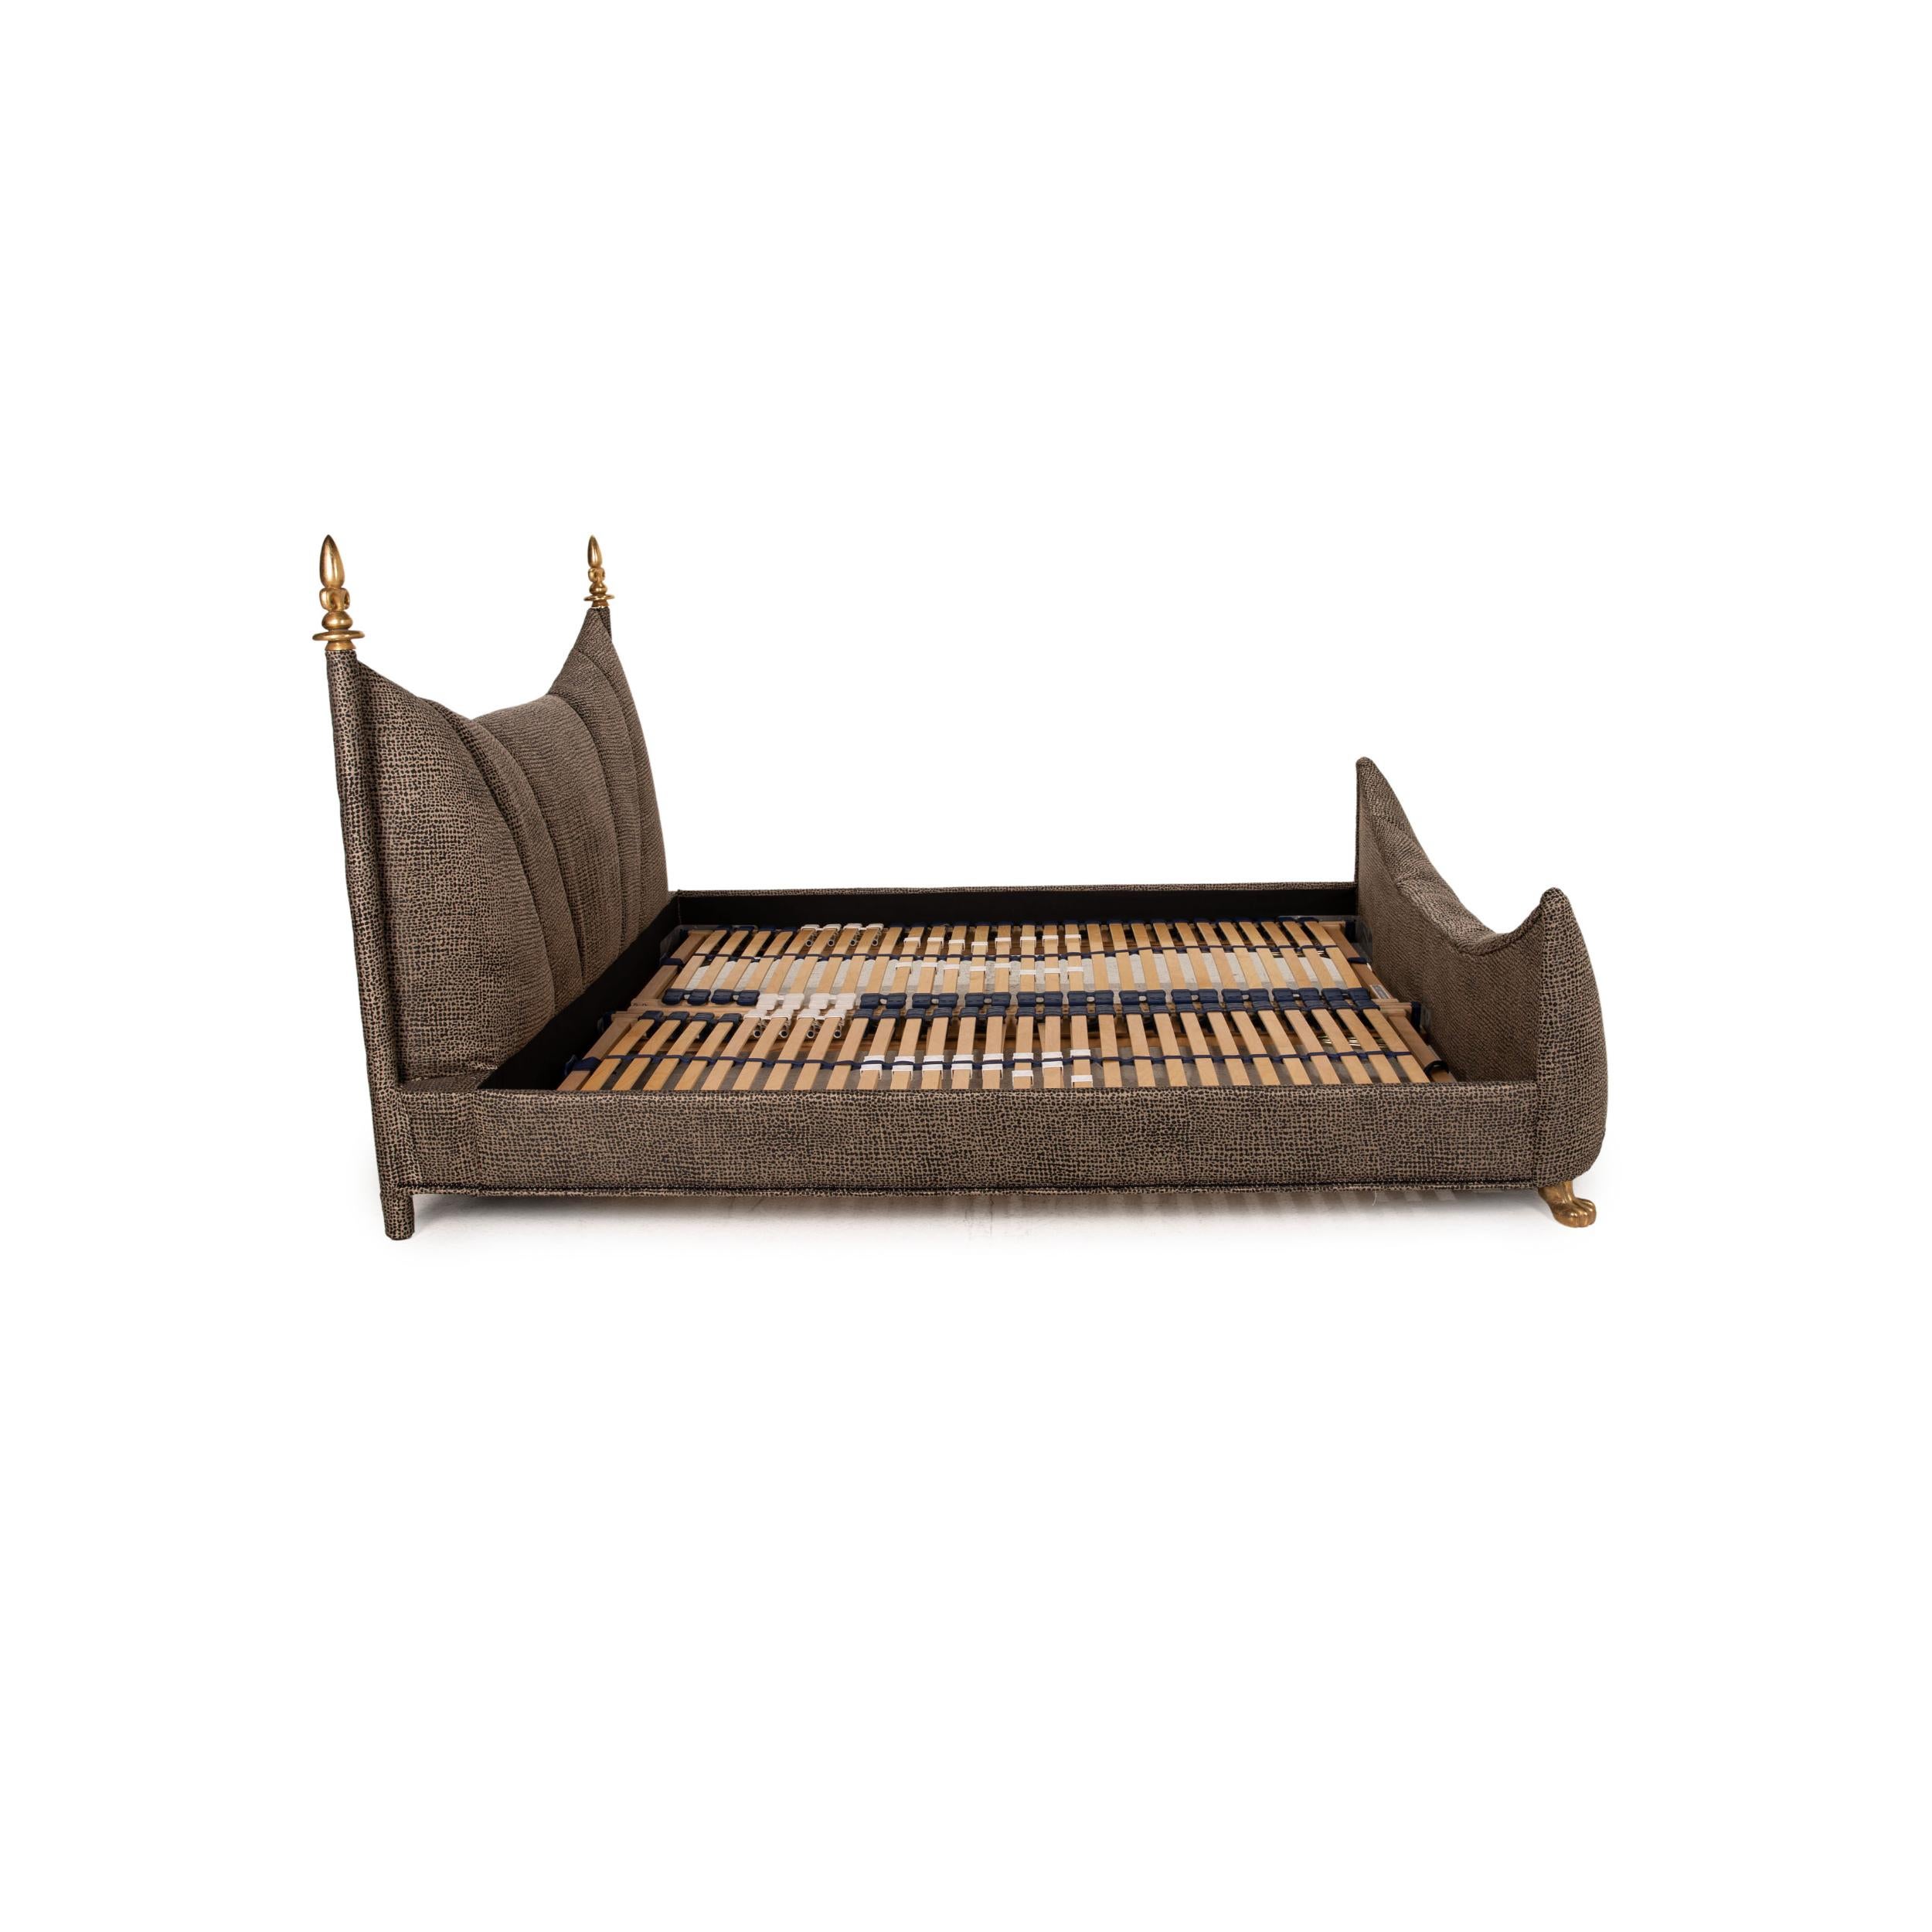 Bretz Ali Baba Velvet Bed Brown Double Bed In Fair Condition For Sale In Cologne, DE